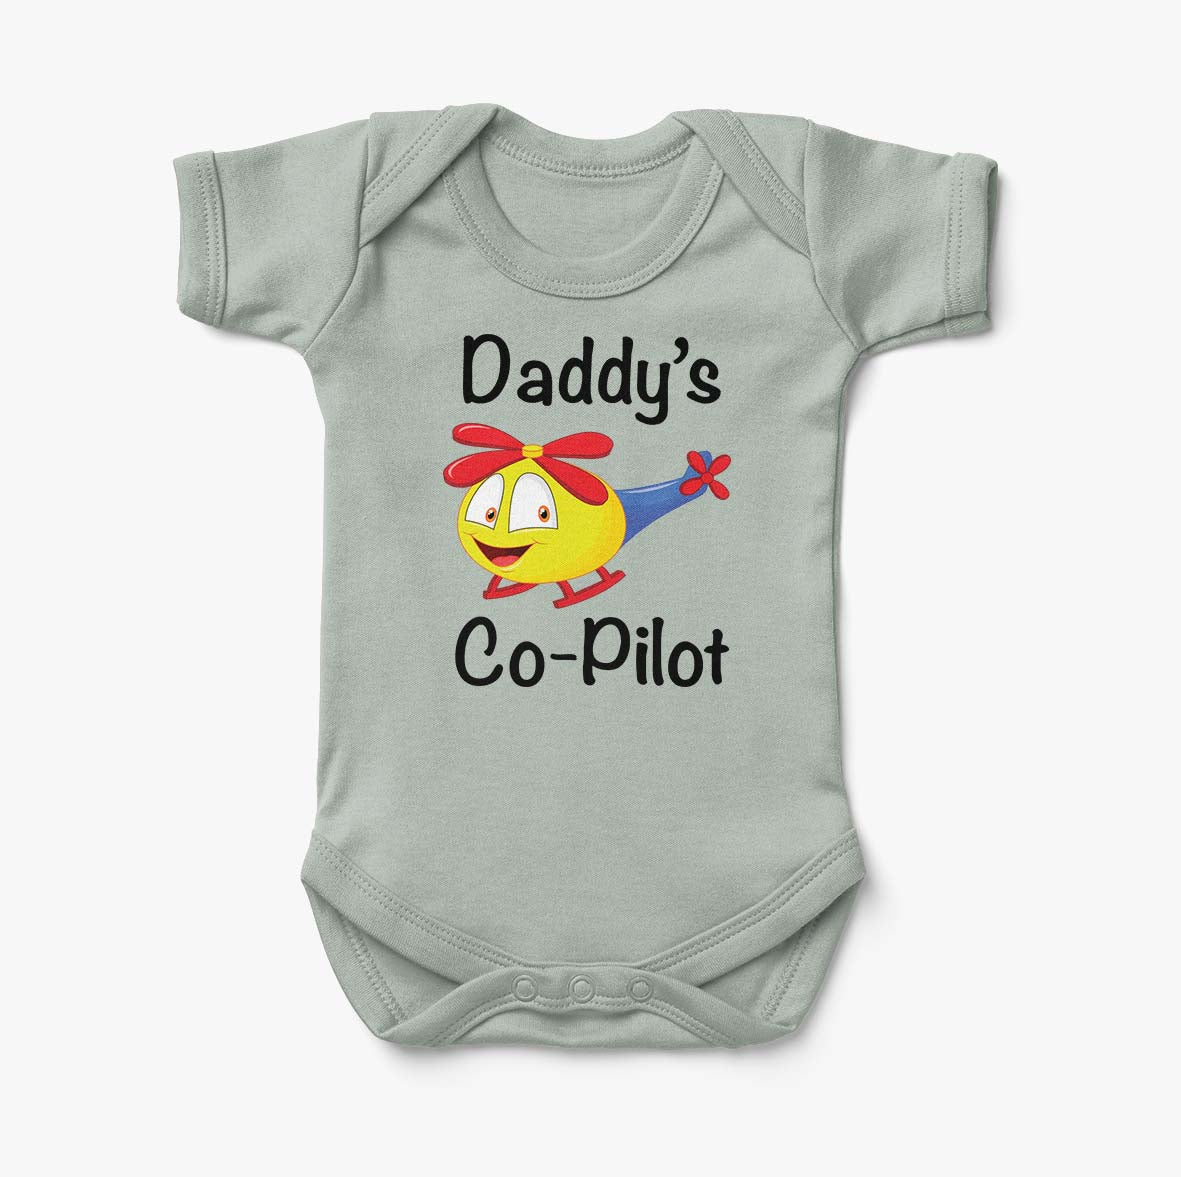 Daddy's Co-Pilot (Helicopter) Designed Baby Bodysuits